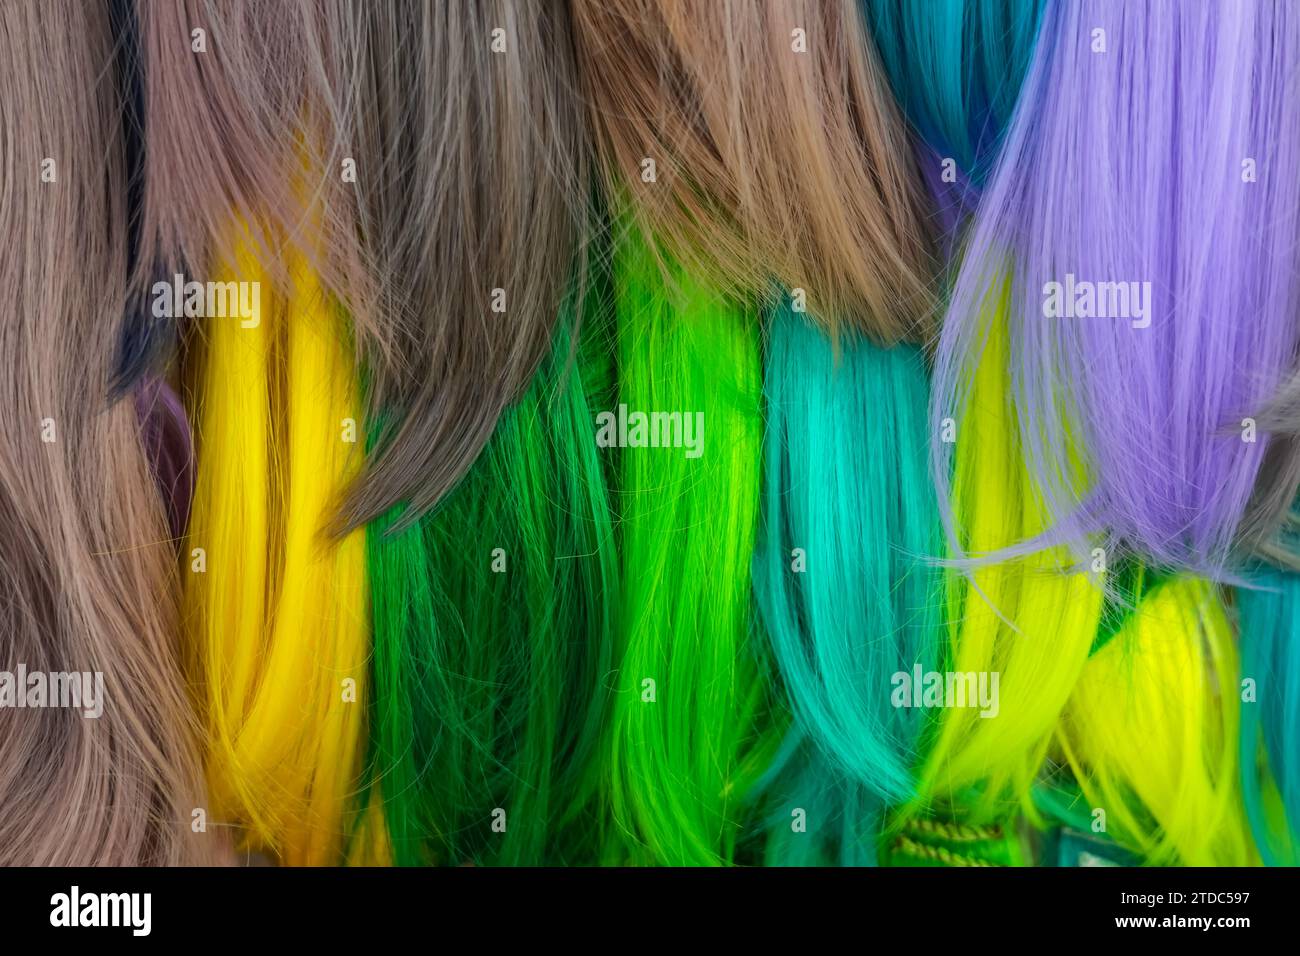 Hair samples of different colors palette. Different hair bright rich tint colors - green, yellow, turquoise. Various hair colors set background close Stock Photo